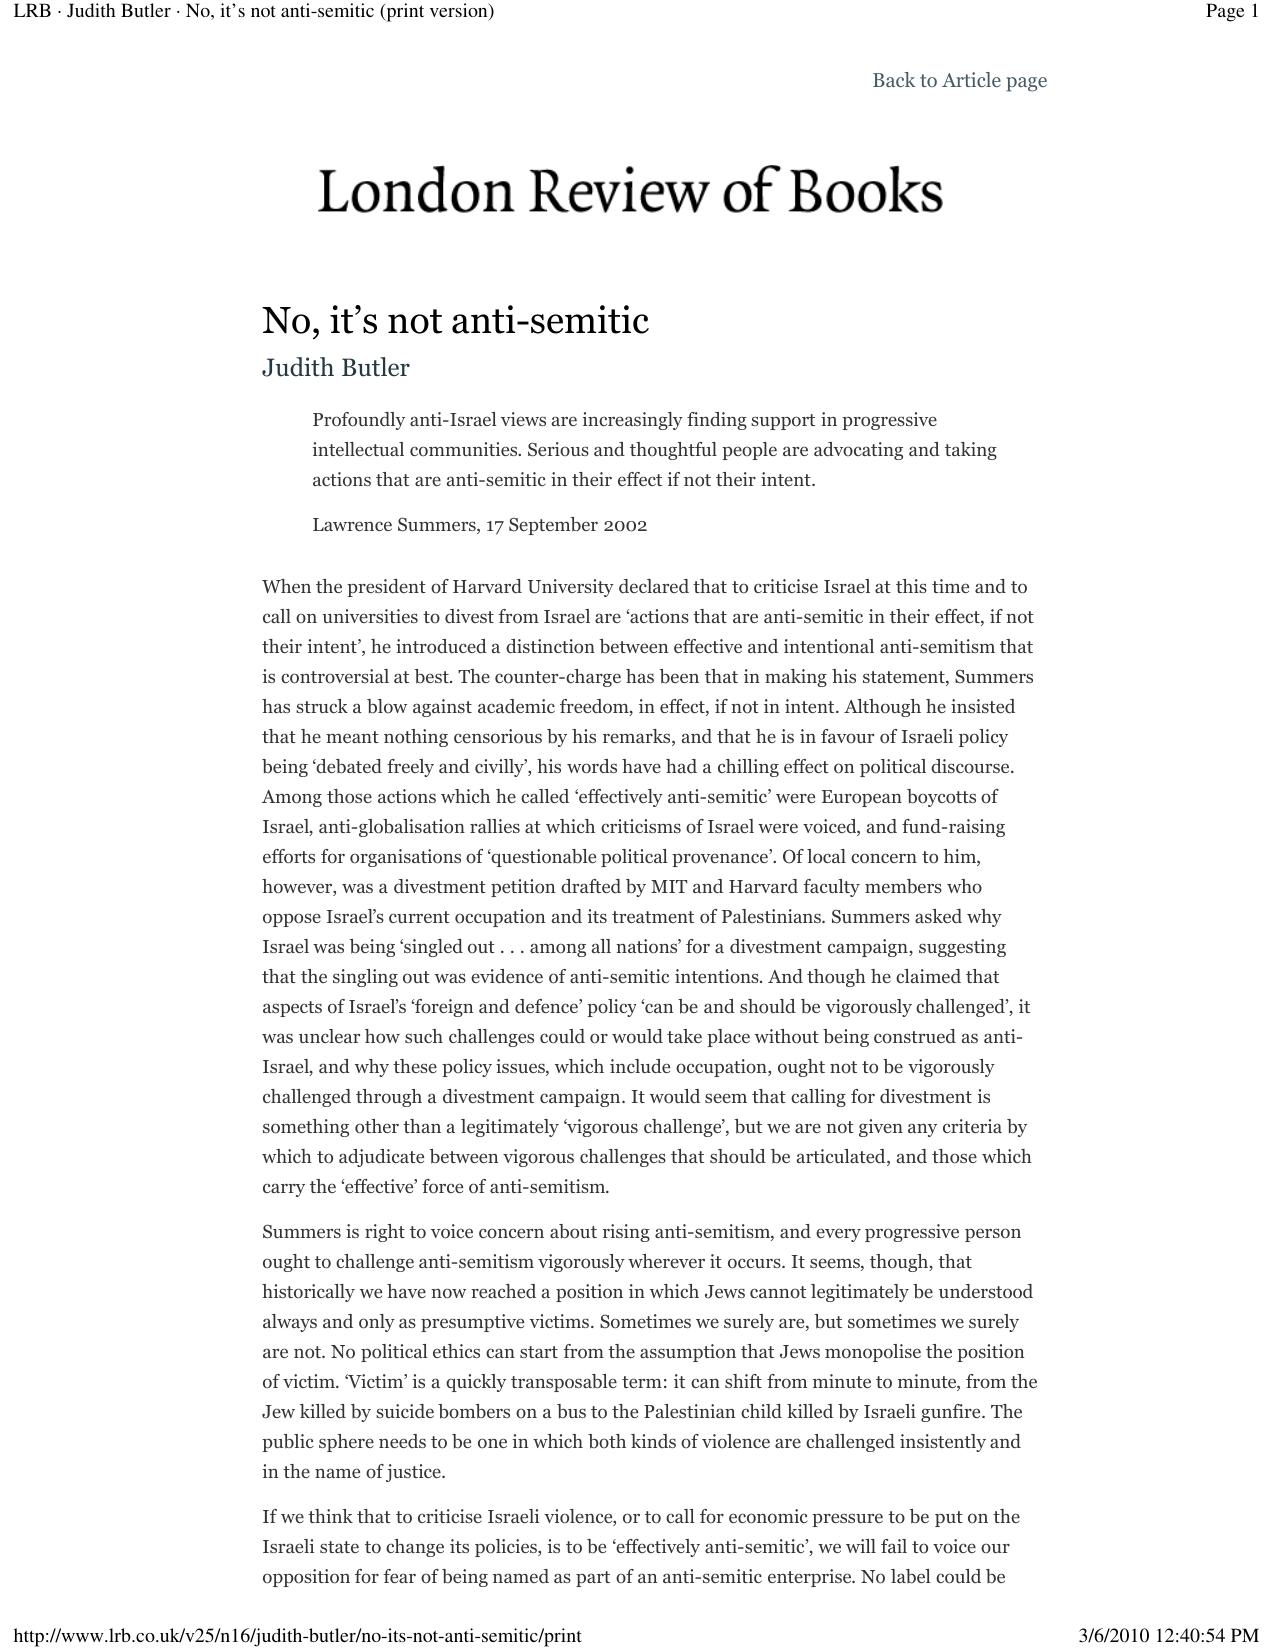 No, it's not anti-semitic [London Review of Books]